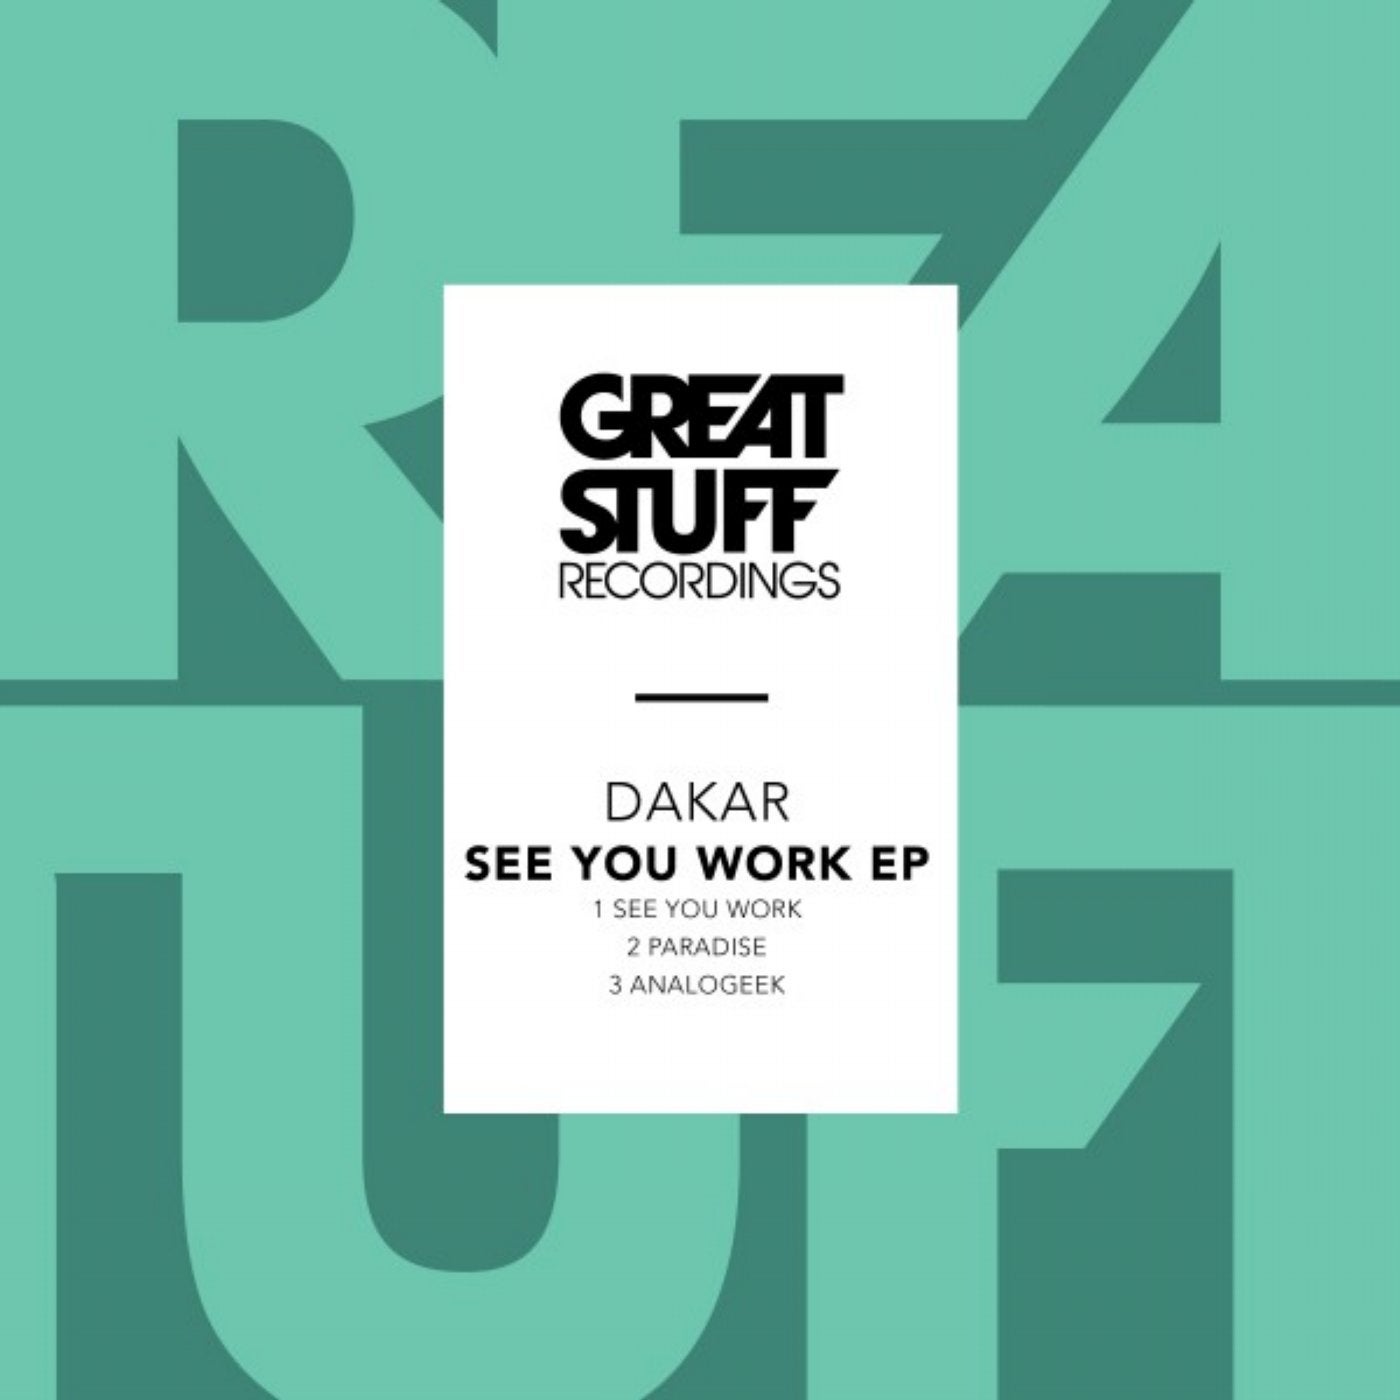 See You Work EP